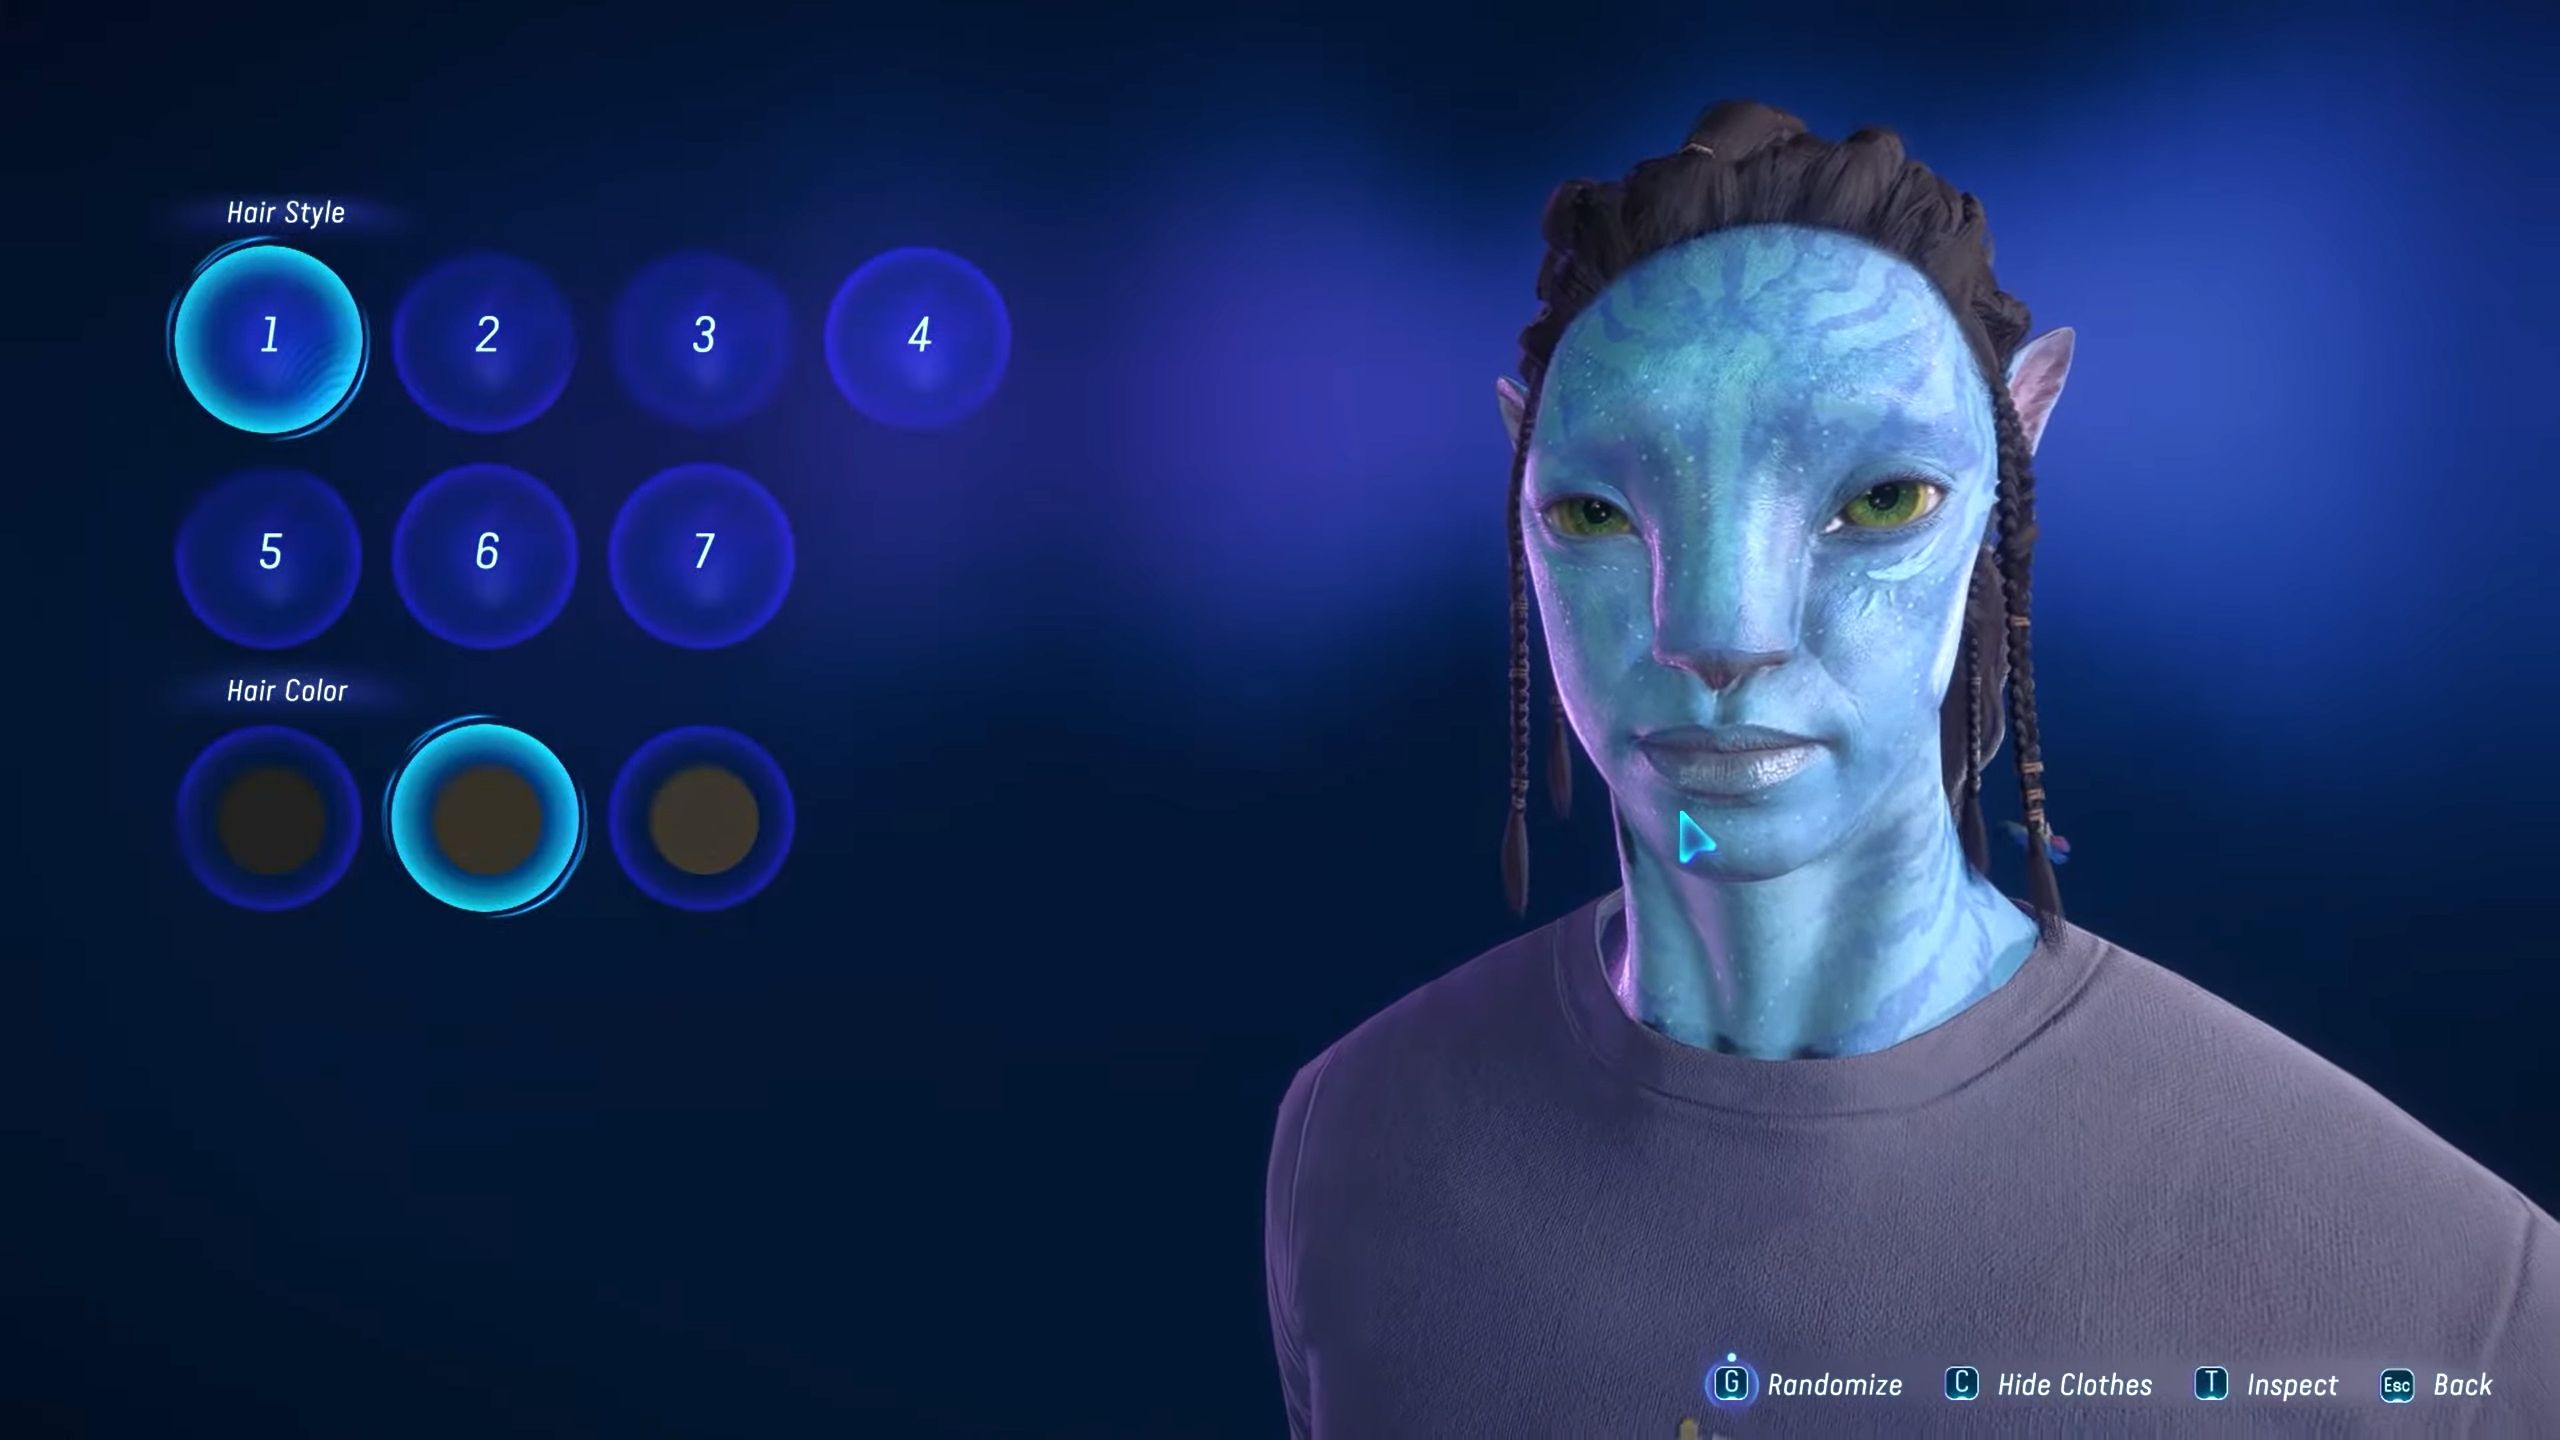 A picture showing the character hairstyle menu Avatar Frontiers of Pandora